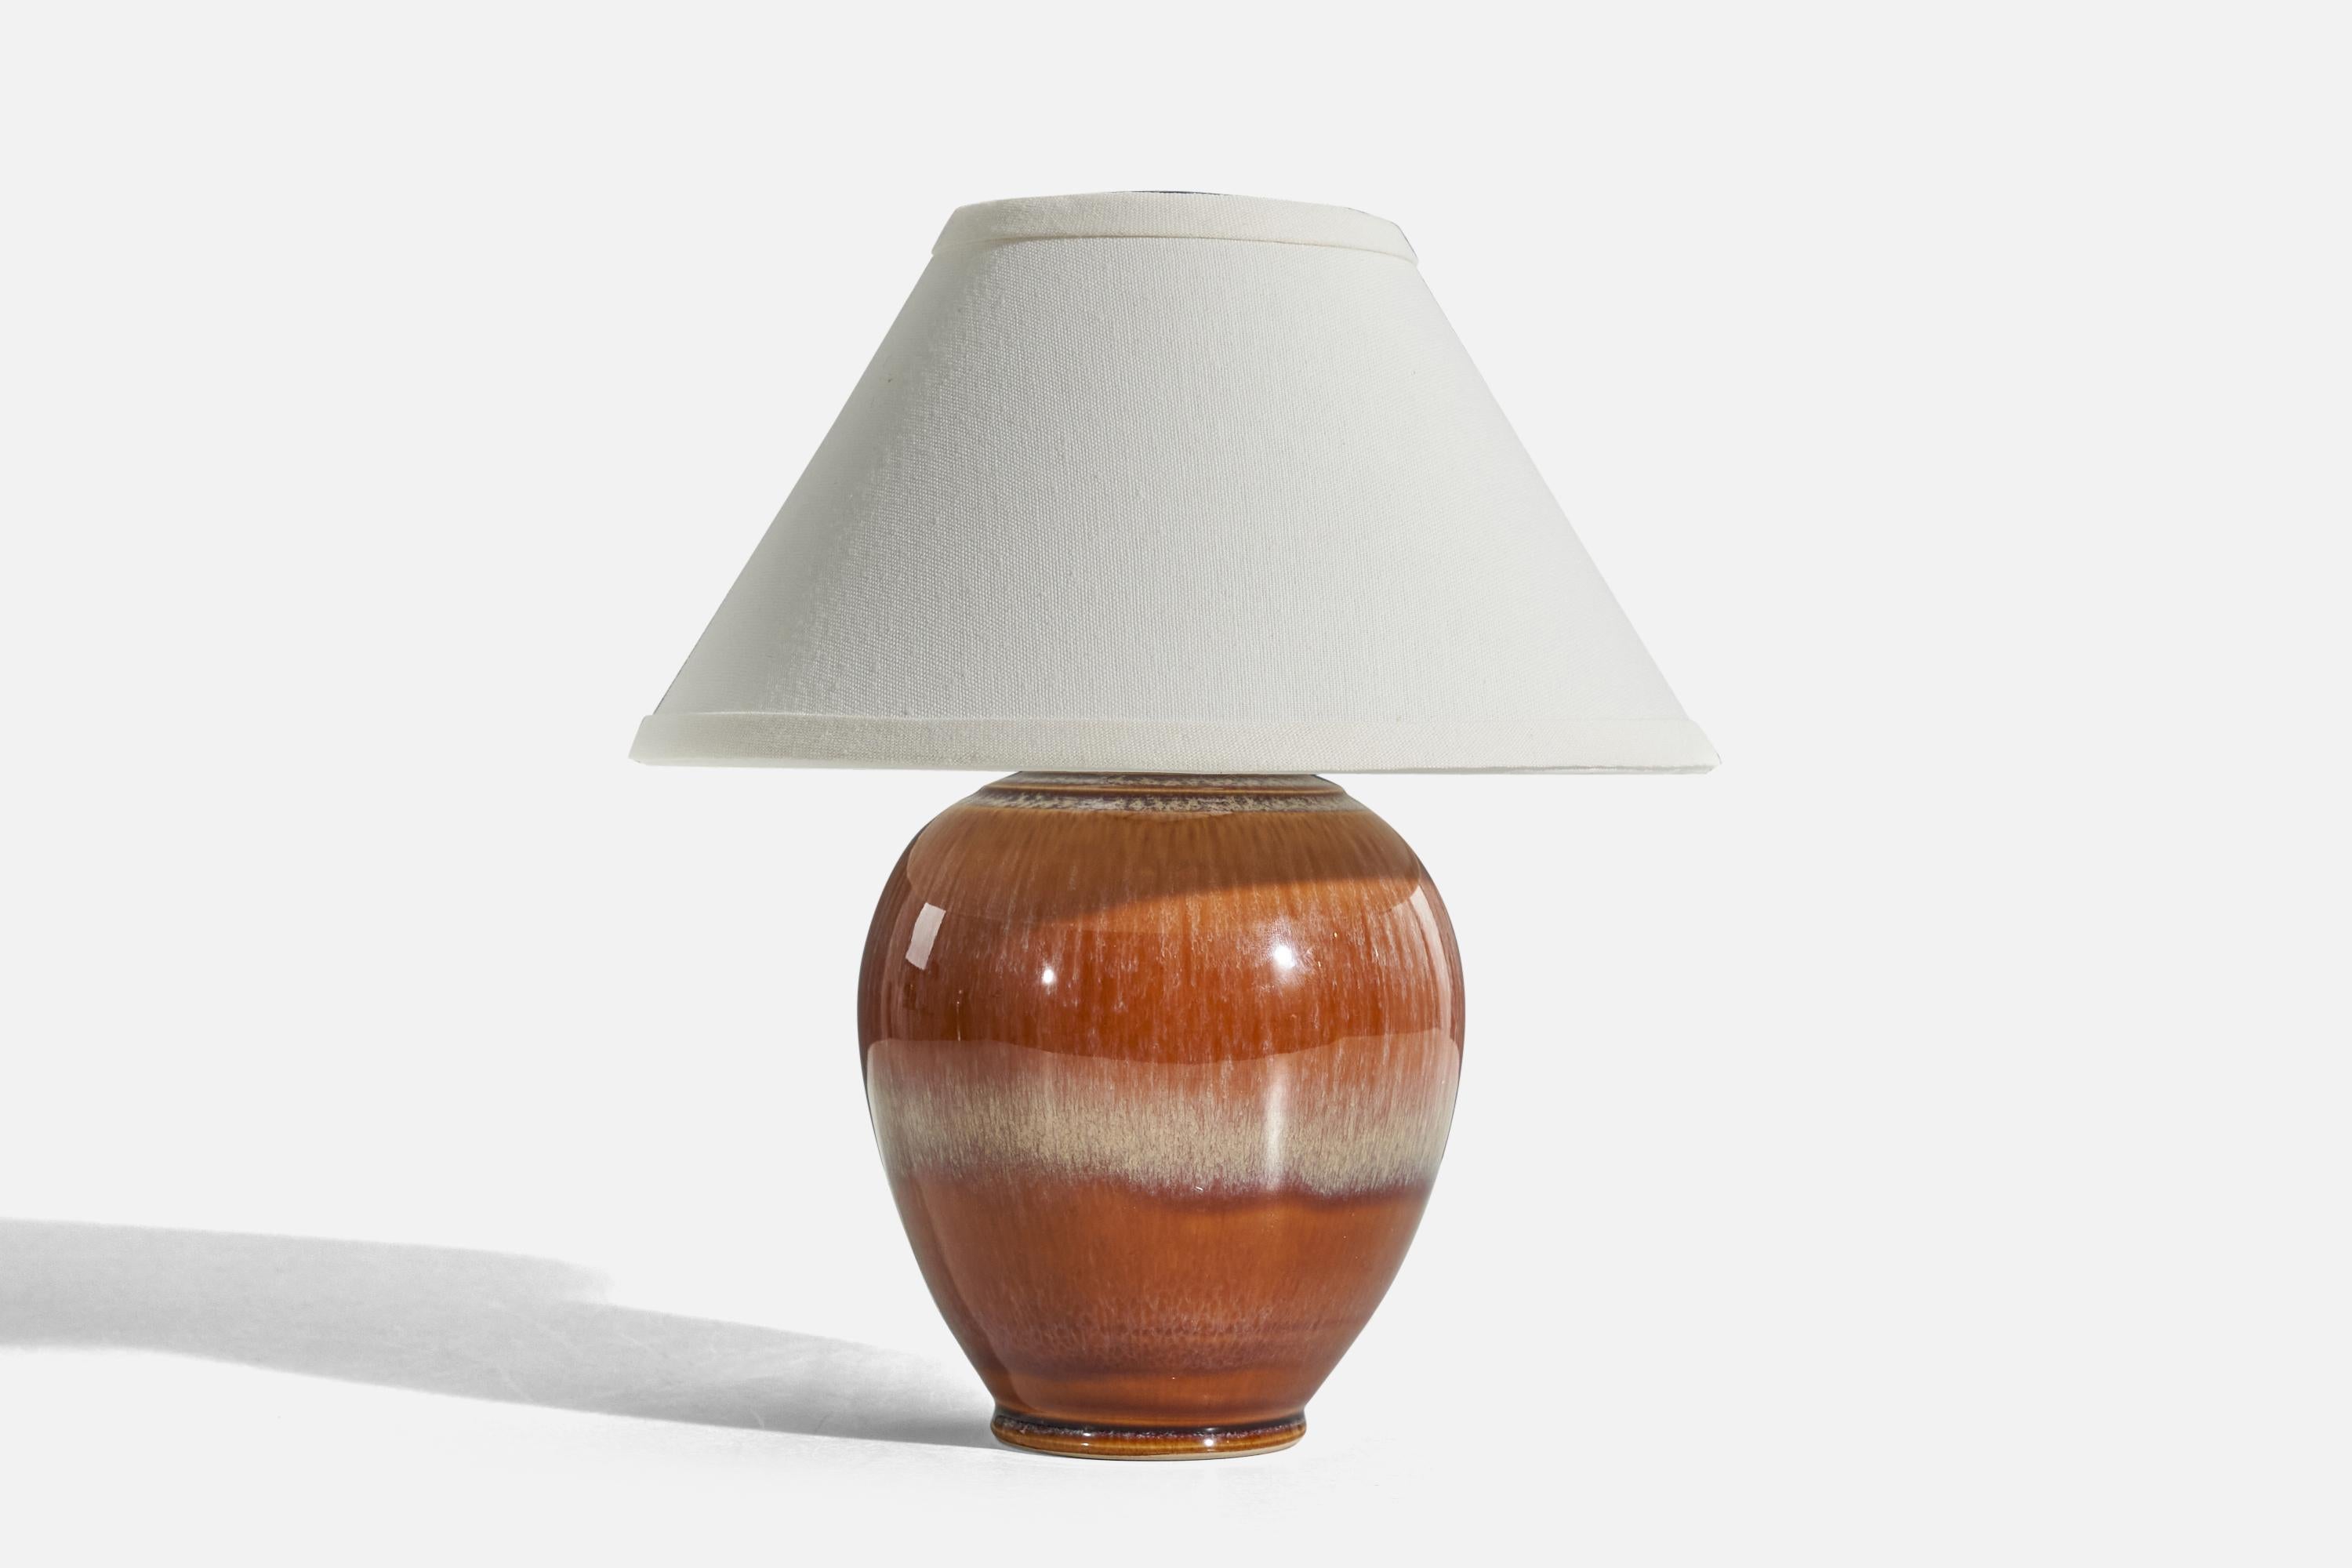 An orange glazed stoneware table lamp designed and produced by a Danish designer, Denmark, c. 1960s.

Sold without lampshade. 
Dimensions of lamp (inches) : 9 x 5.87 x 5.87 (H x W x D)
Dimensions of shade (inches) : 4.25 x 10.25 x 6 (T x B x